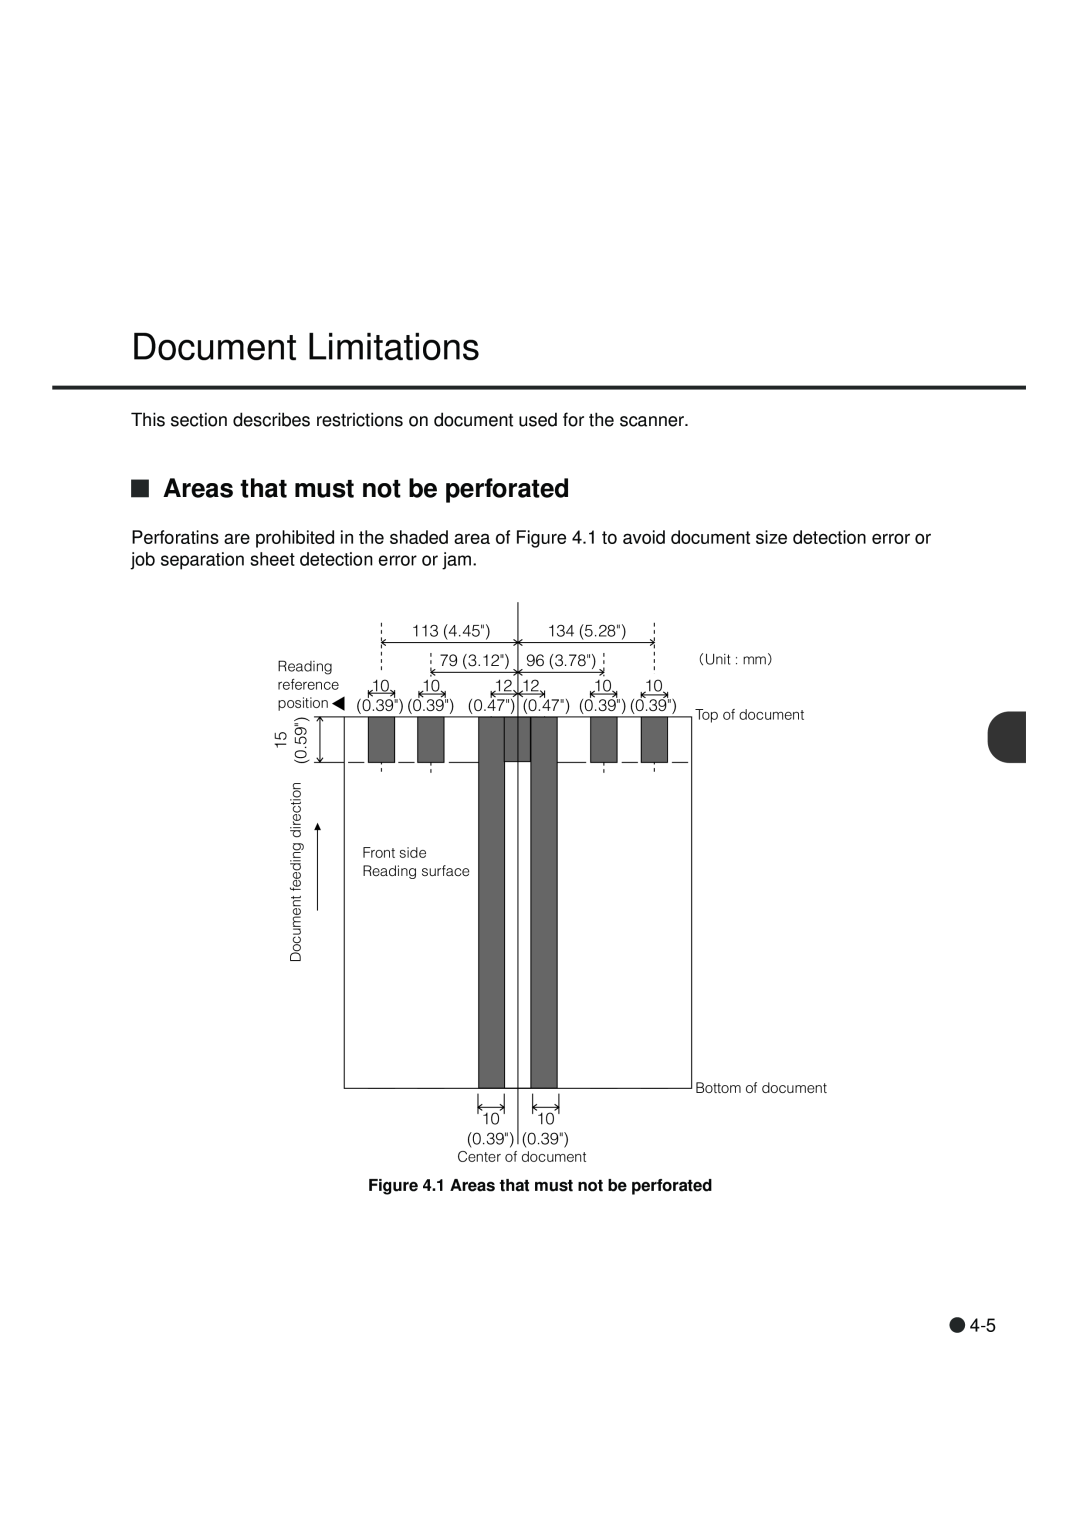 Fujitsu fi-4990C manual Document Limitations, Areas that must not be perforated 